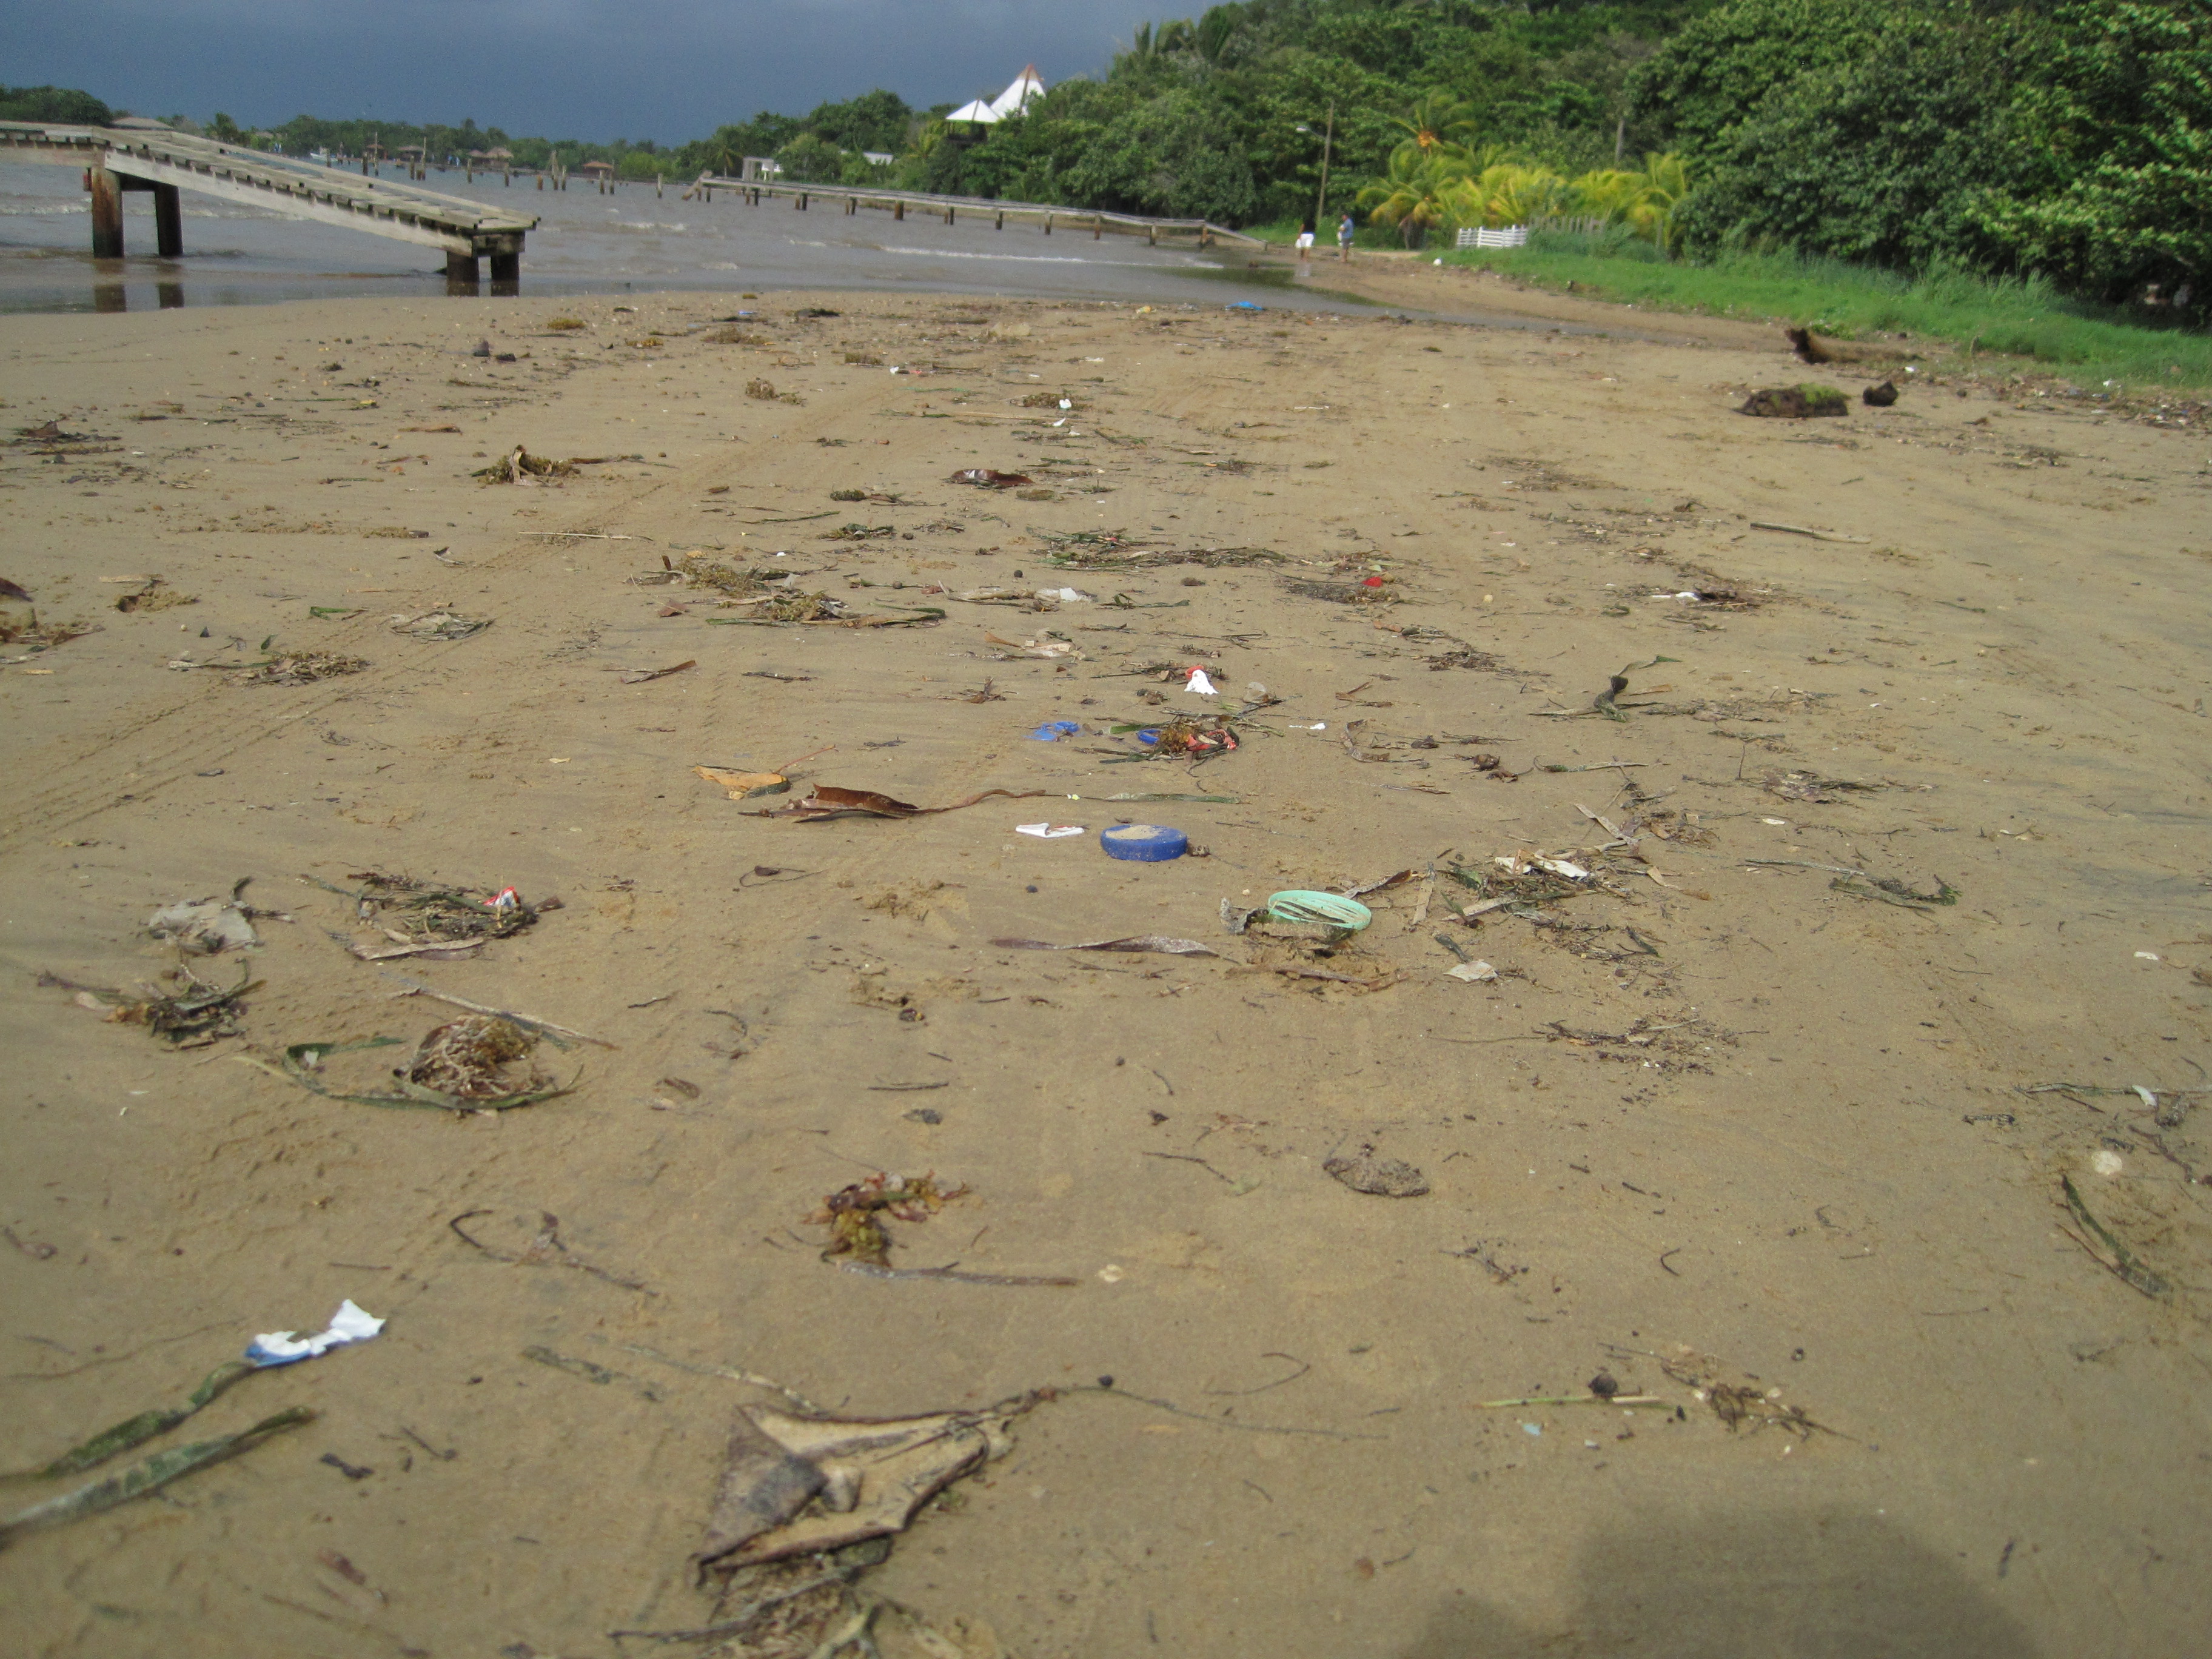 Debris washed on shore. Project AWARE actively supports cleaning up trash.